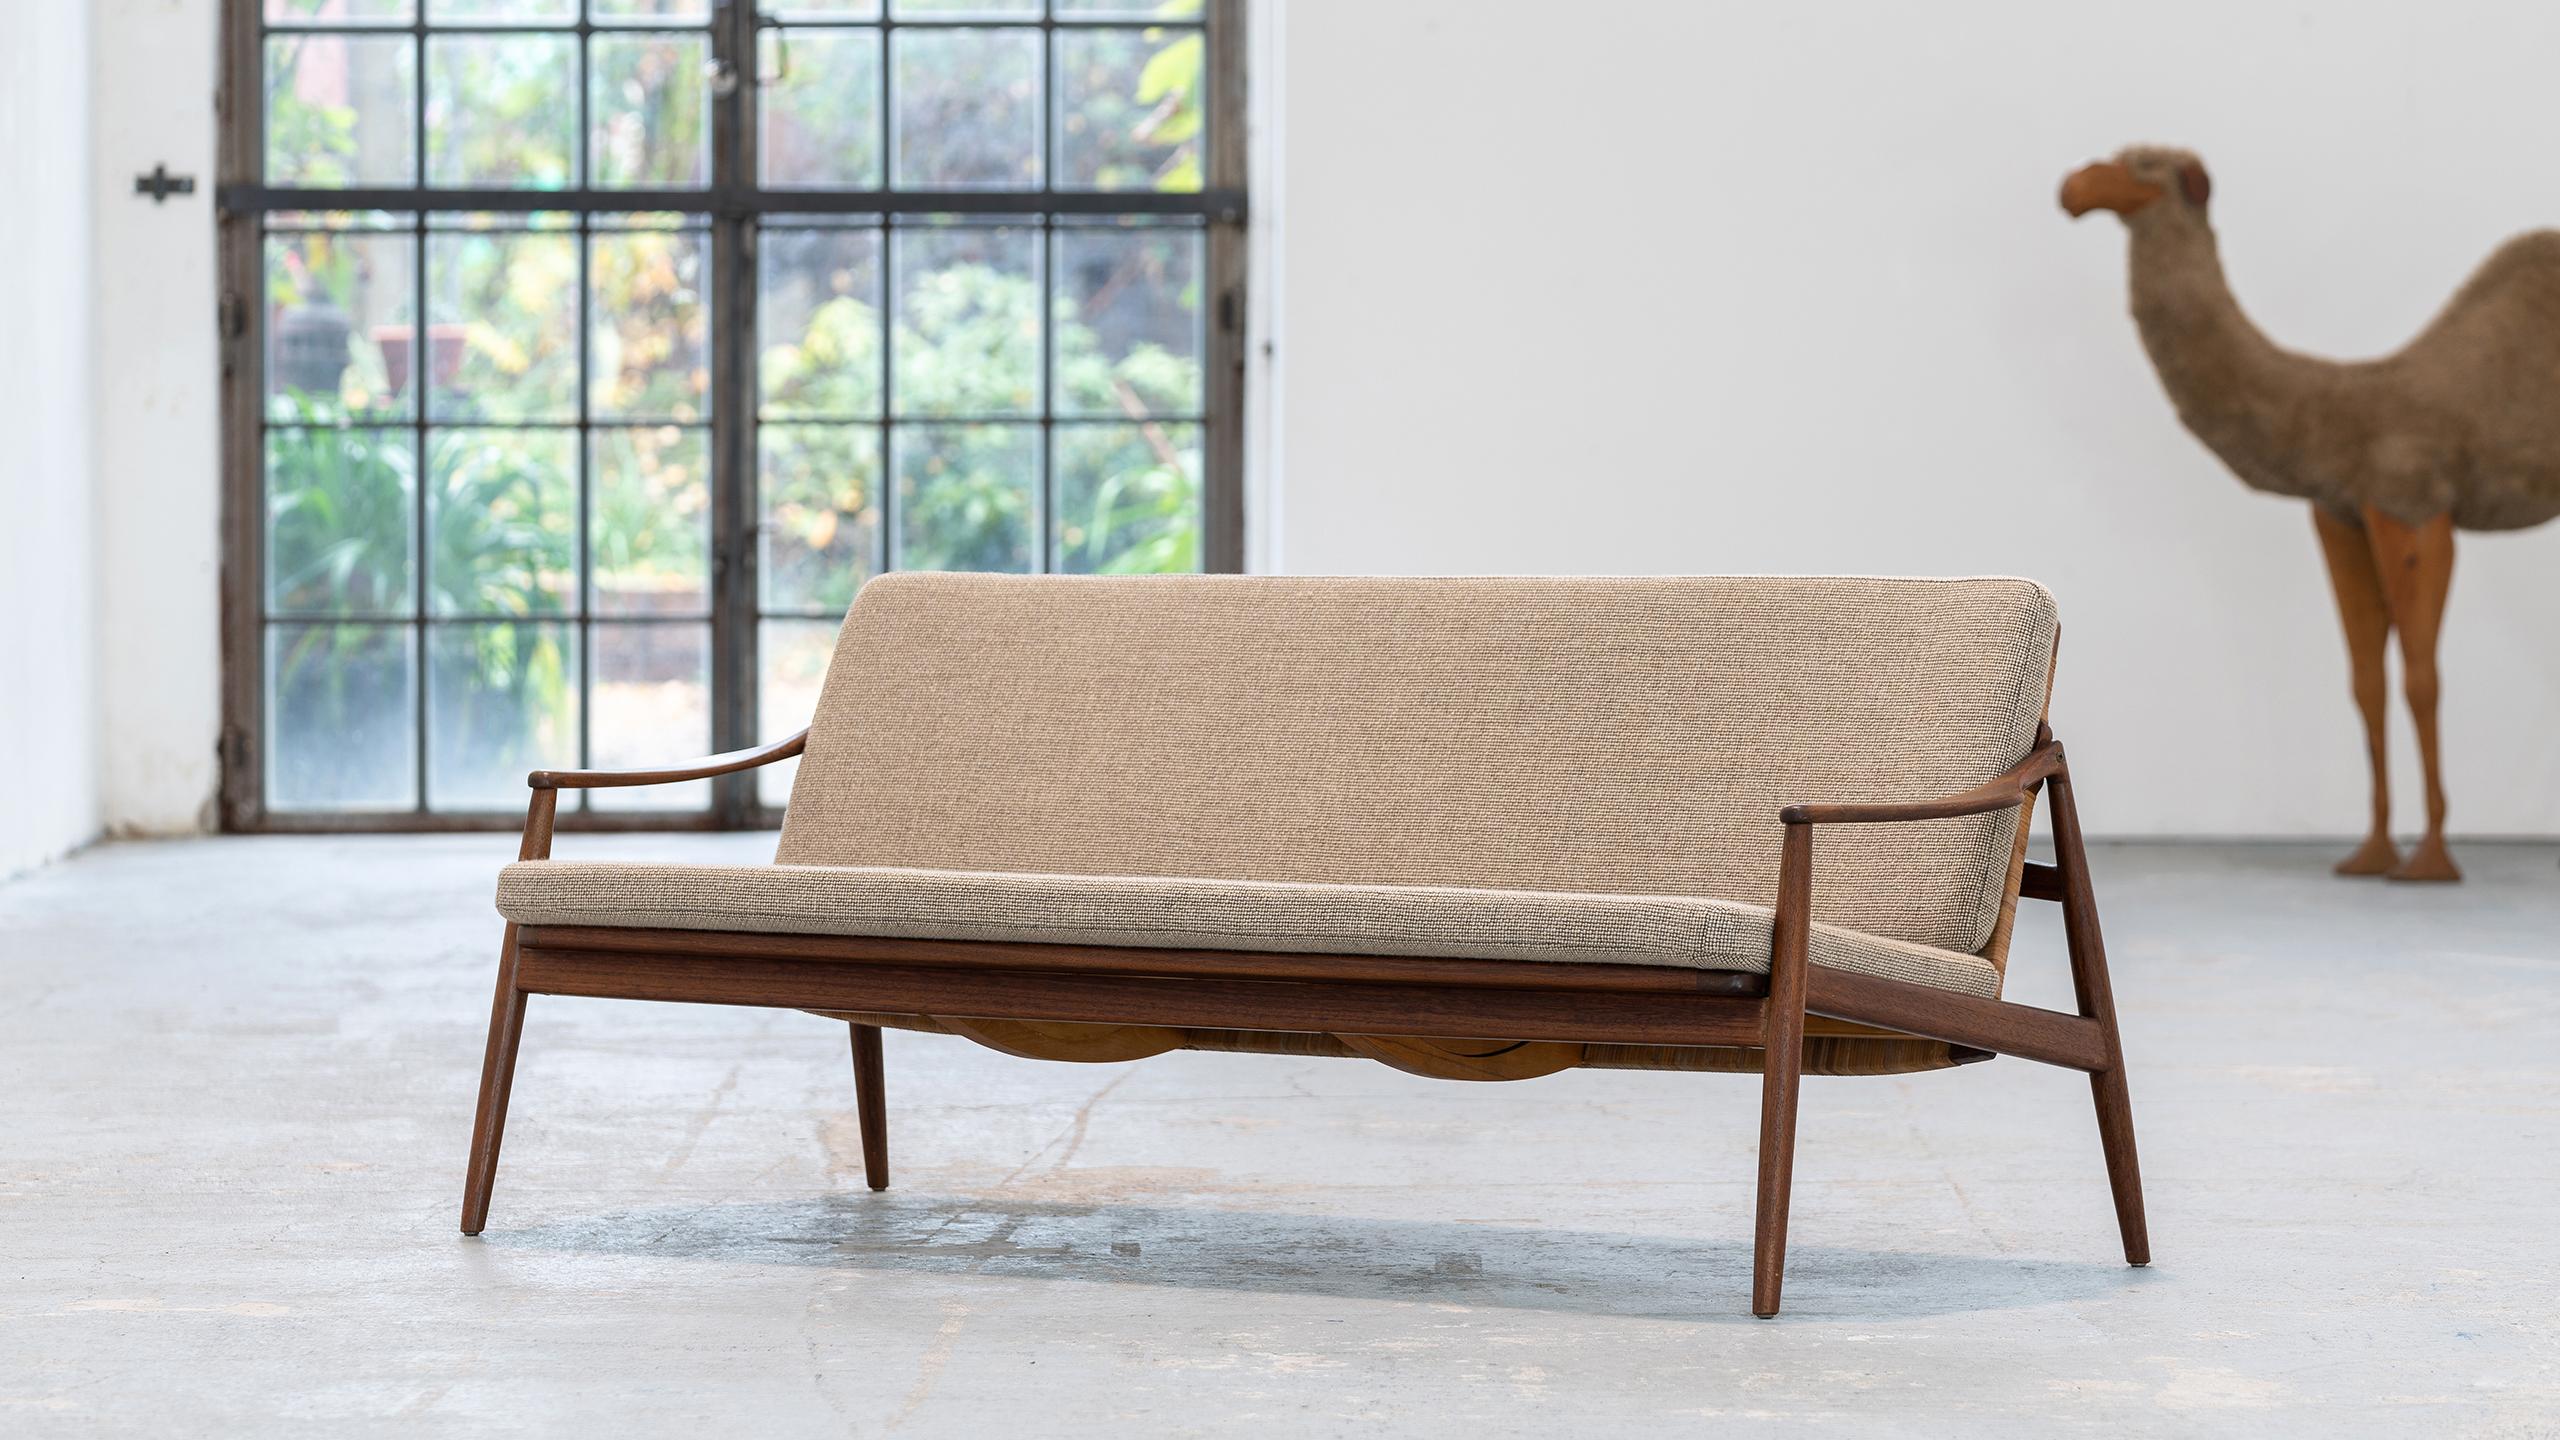 Three seat Sofa designed by Hartmut Lohmeyer for Wilkhahn in 1962.
Hand crafted in Germany by Wilkhahn.

The sofa is sensuous and organically shaped. It features a slightly tilted back and is executed with tapered legs. The softly bent armrests